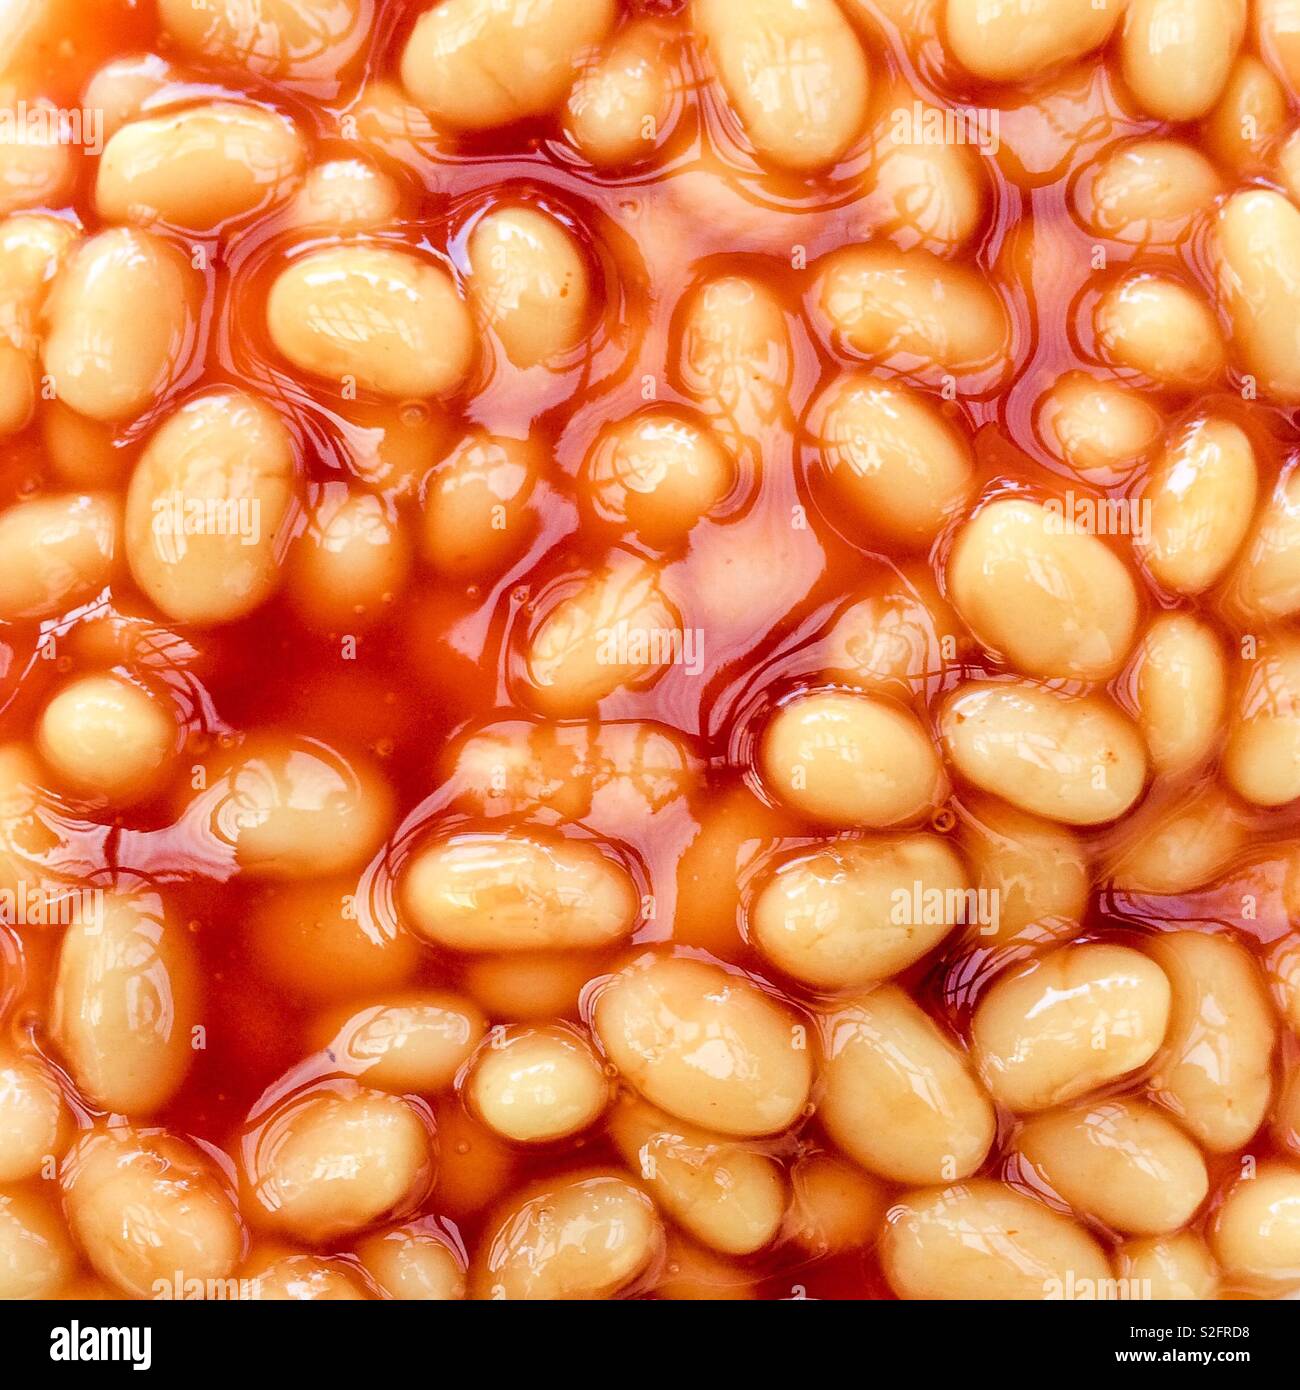 Baked beans in tomato sauce Stock Photo